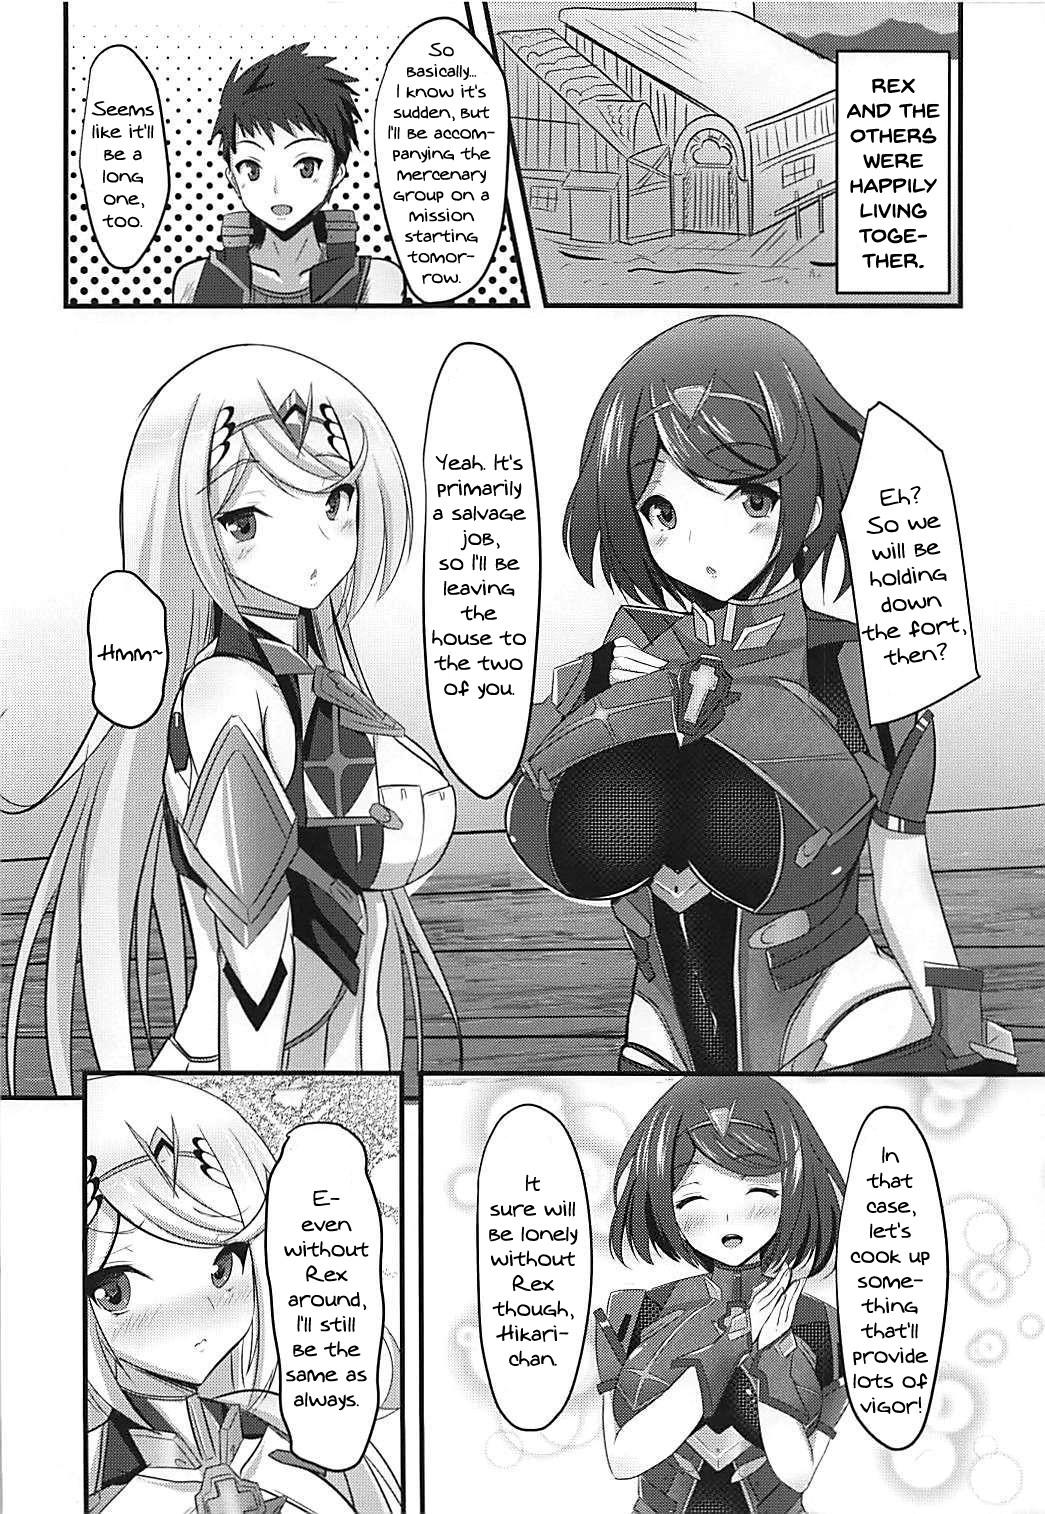 Pickup HOMUHIKAex - Xenoblade chronicles 2 Mother fuck - Page 3